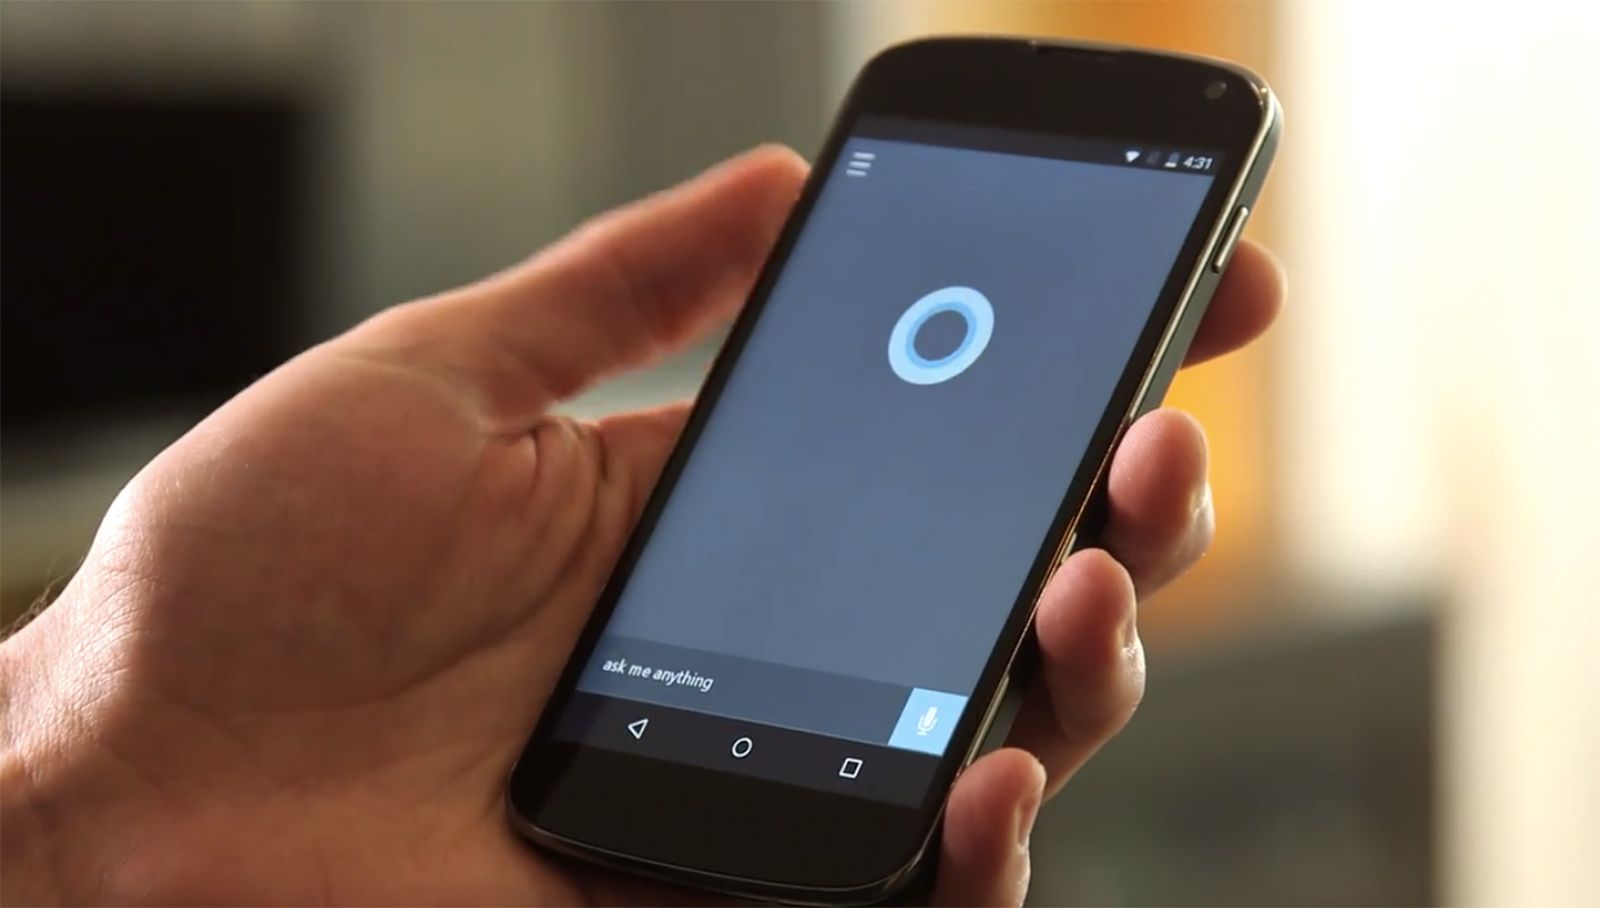 microsoft’s cortana is coming to android and iphone get a sneak peek now image 1